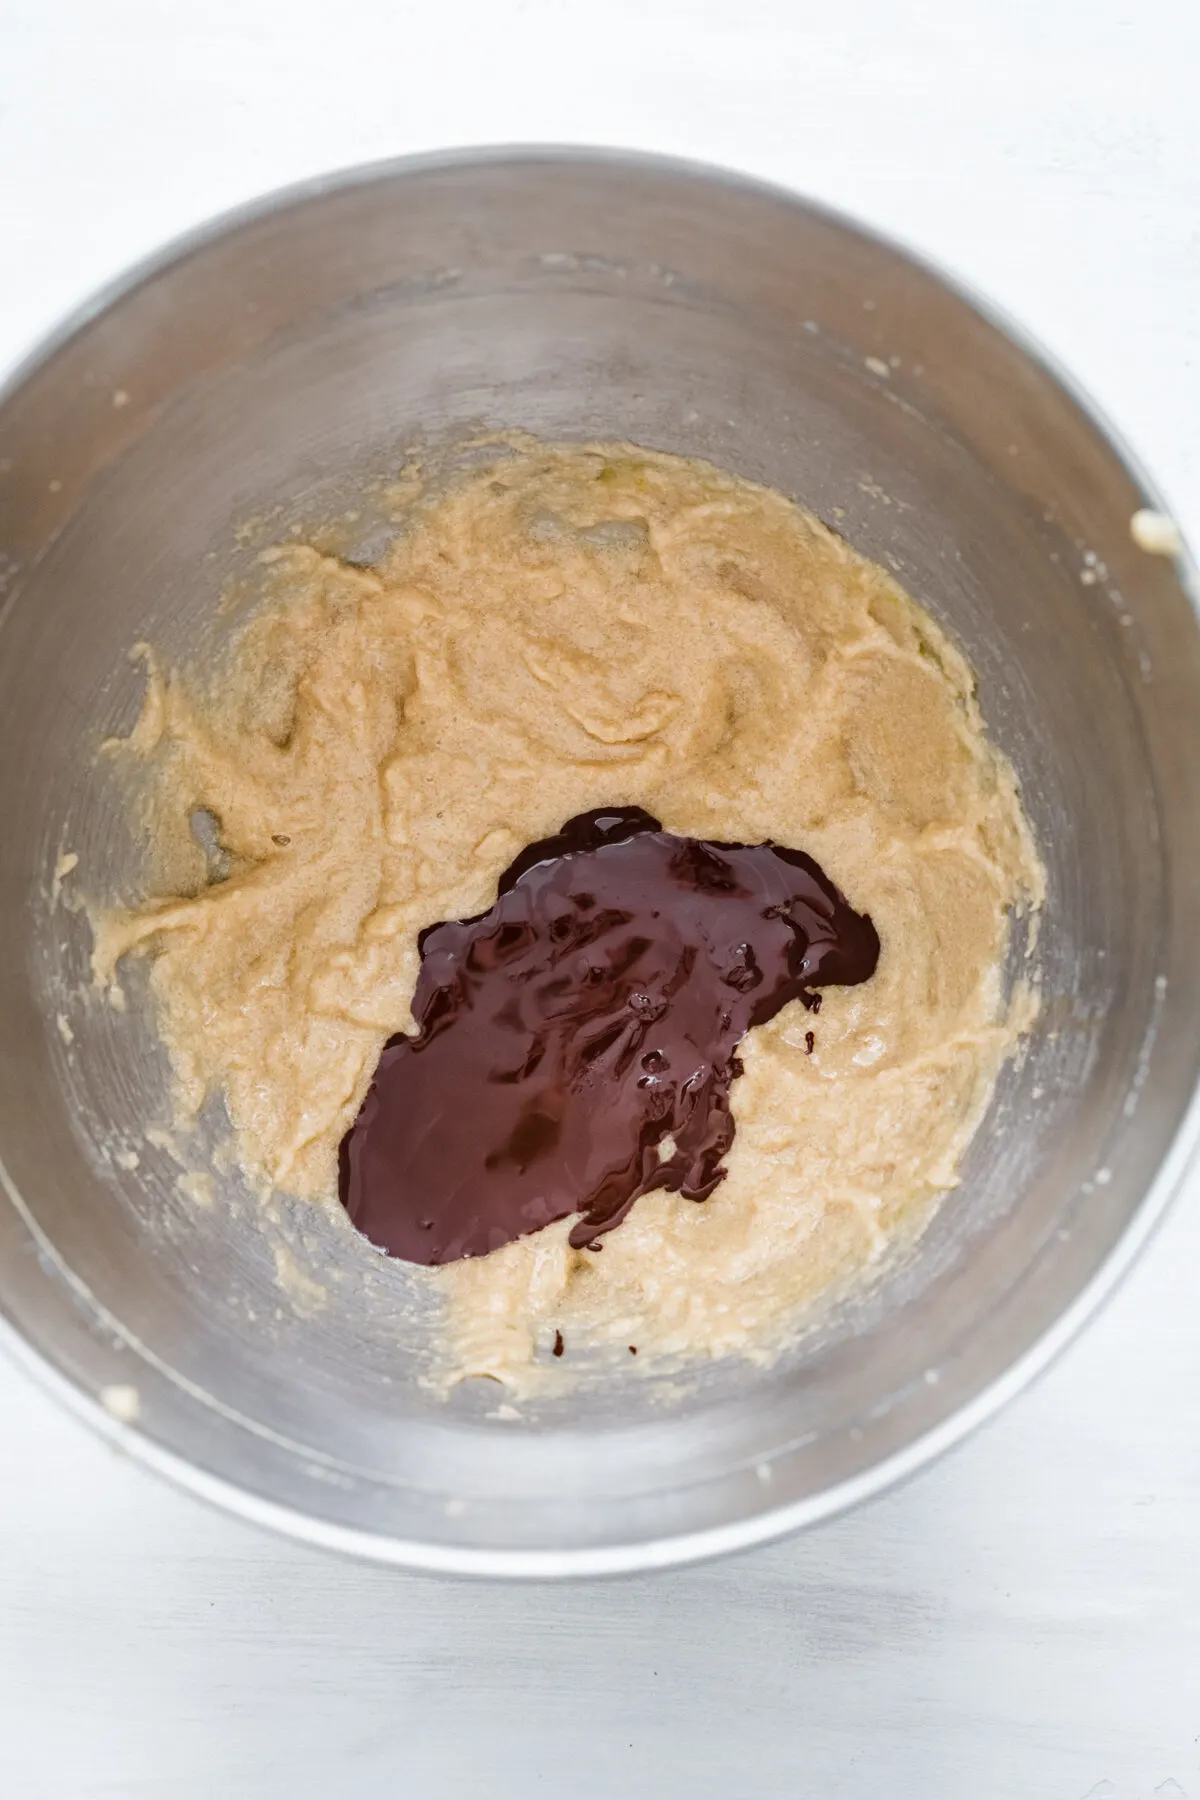 melted chocolate added to the wet mixture.